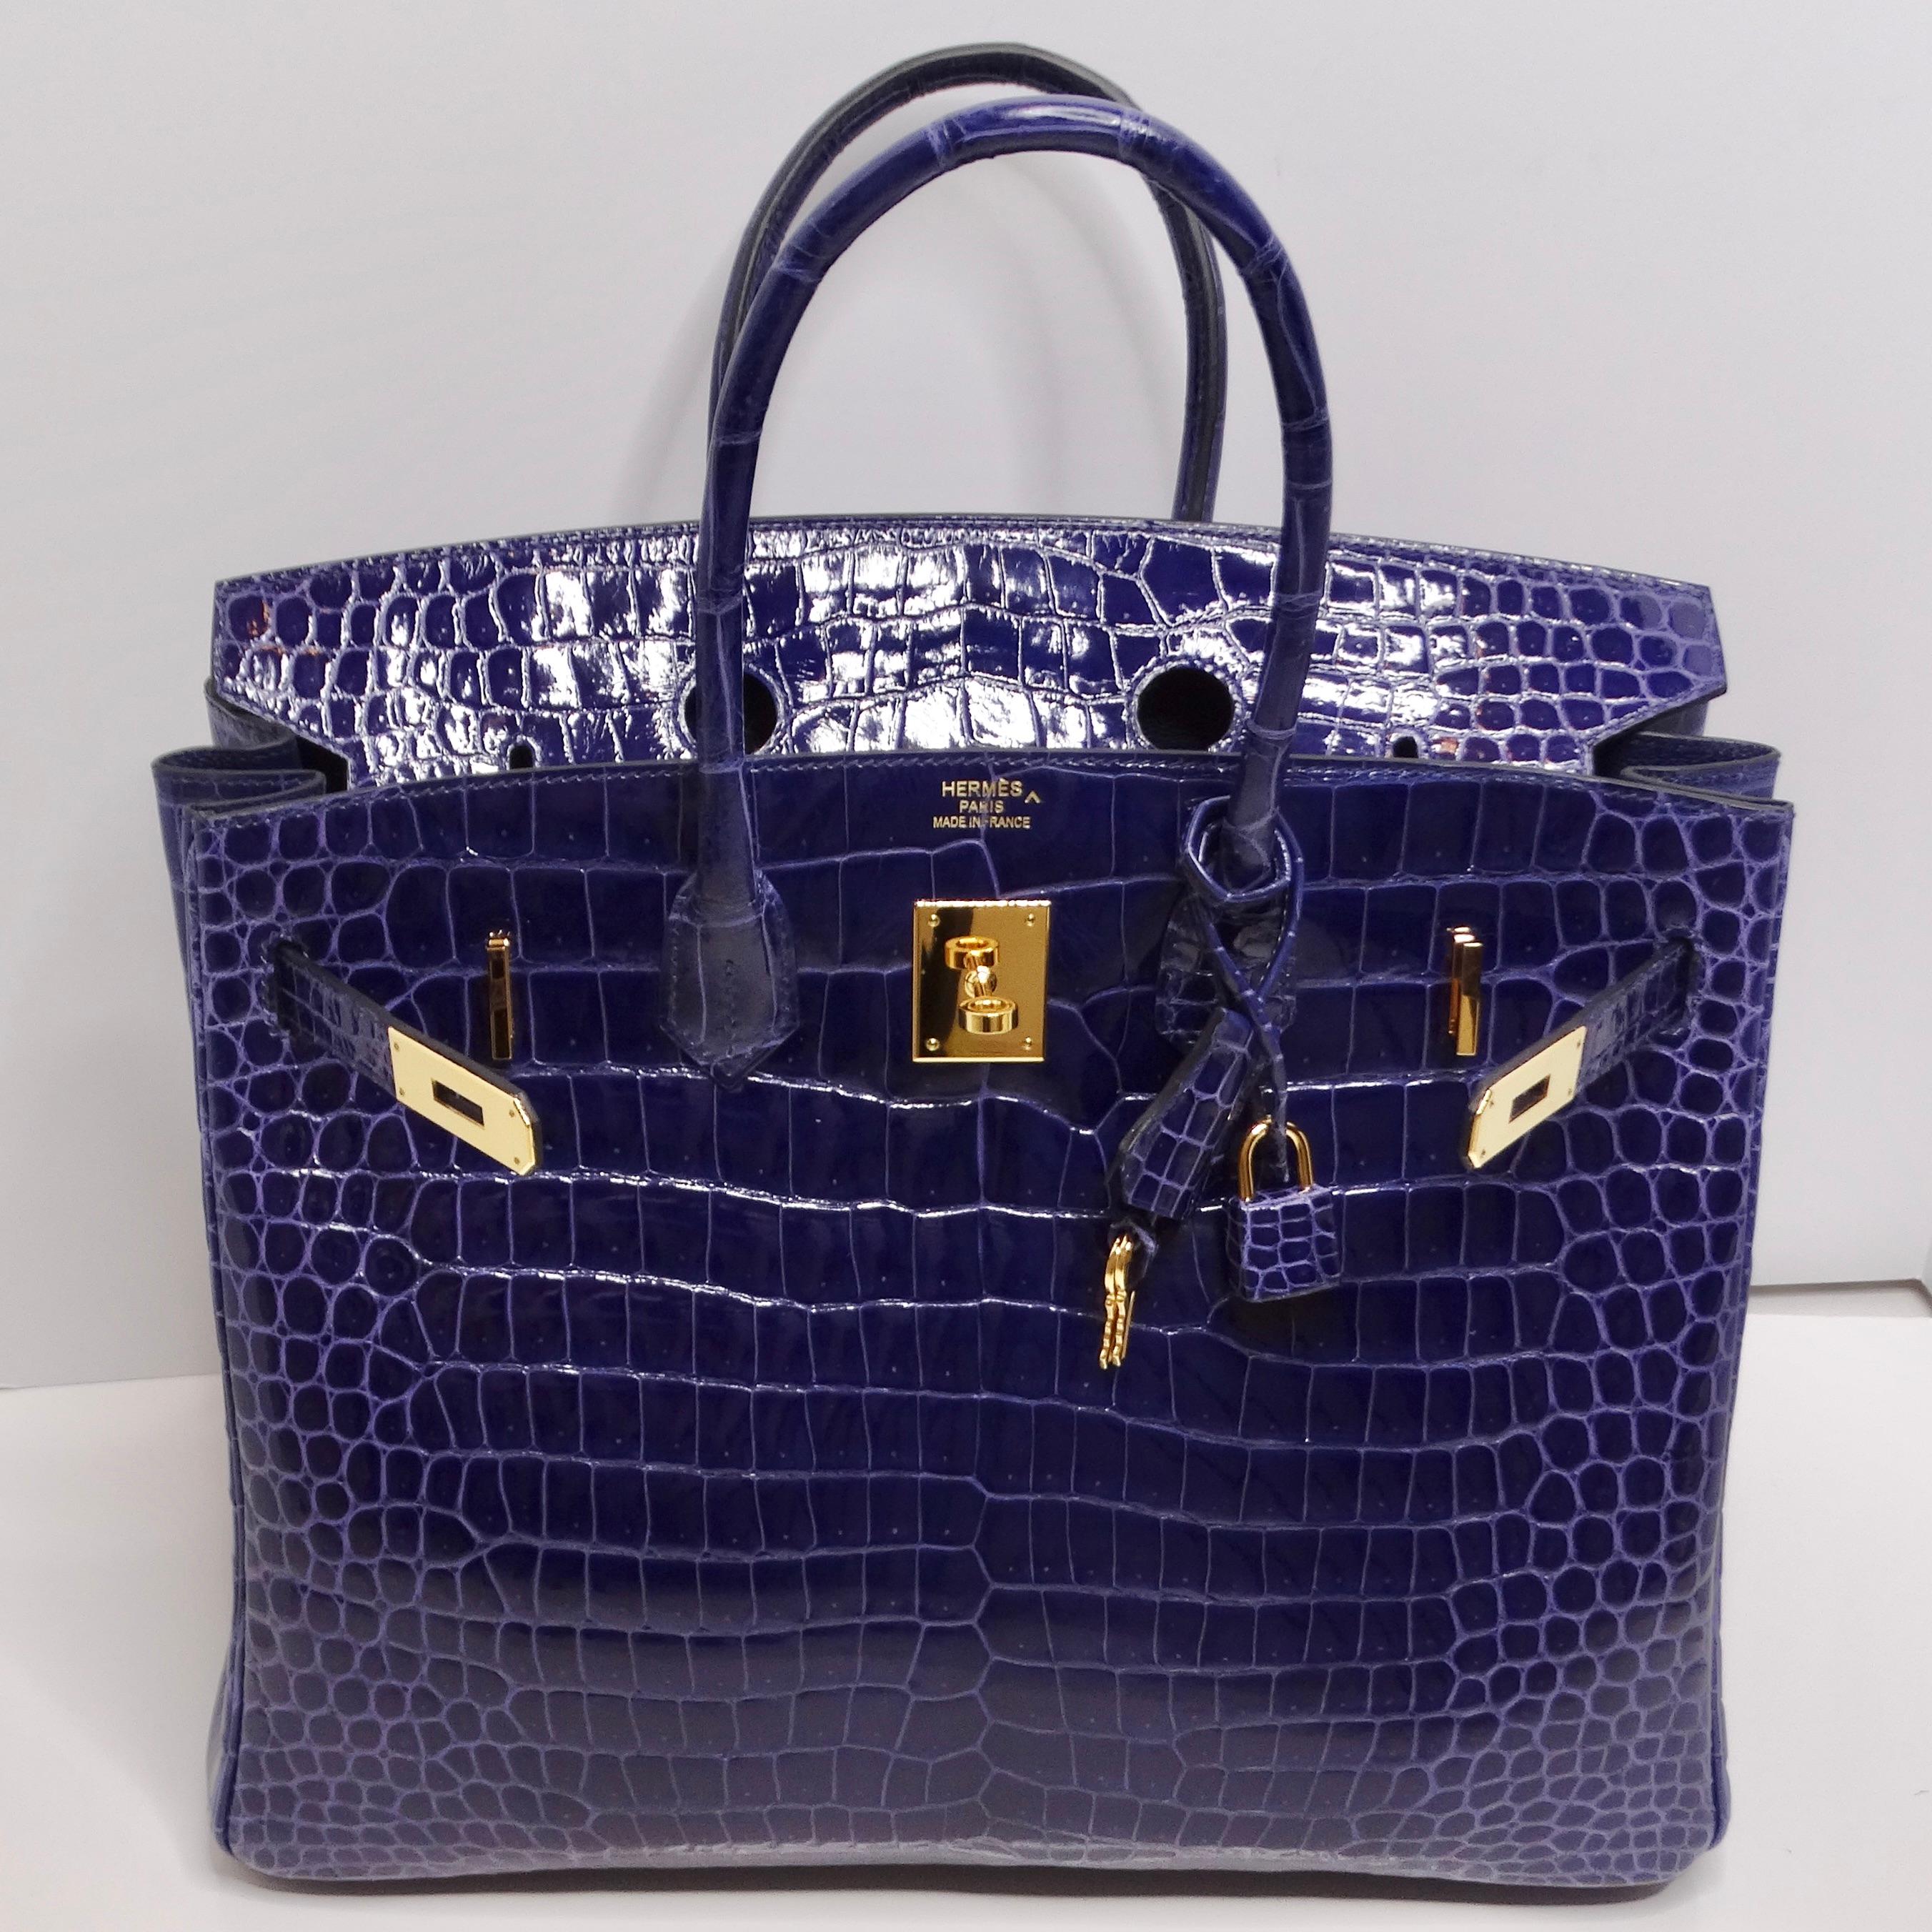 Introducing the epitome of luxury and sophistication, the Hermes Birkin 35cm Amethyst Shiny Porosus Crocodile Gold Hardware handbag. Crafted in 2020, this iconic handbag is a testament to Hermes' impeccable craftsmanship and timeless design.

This